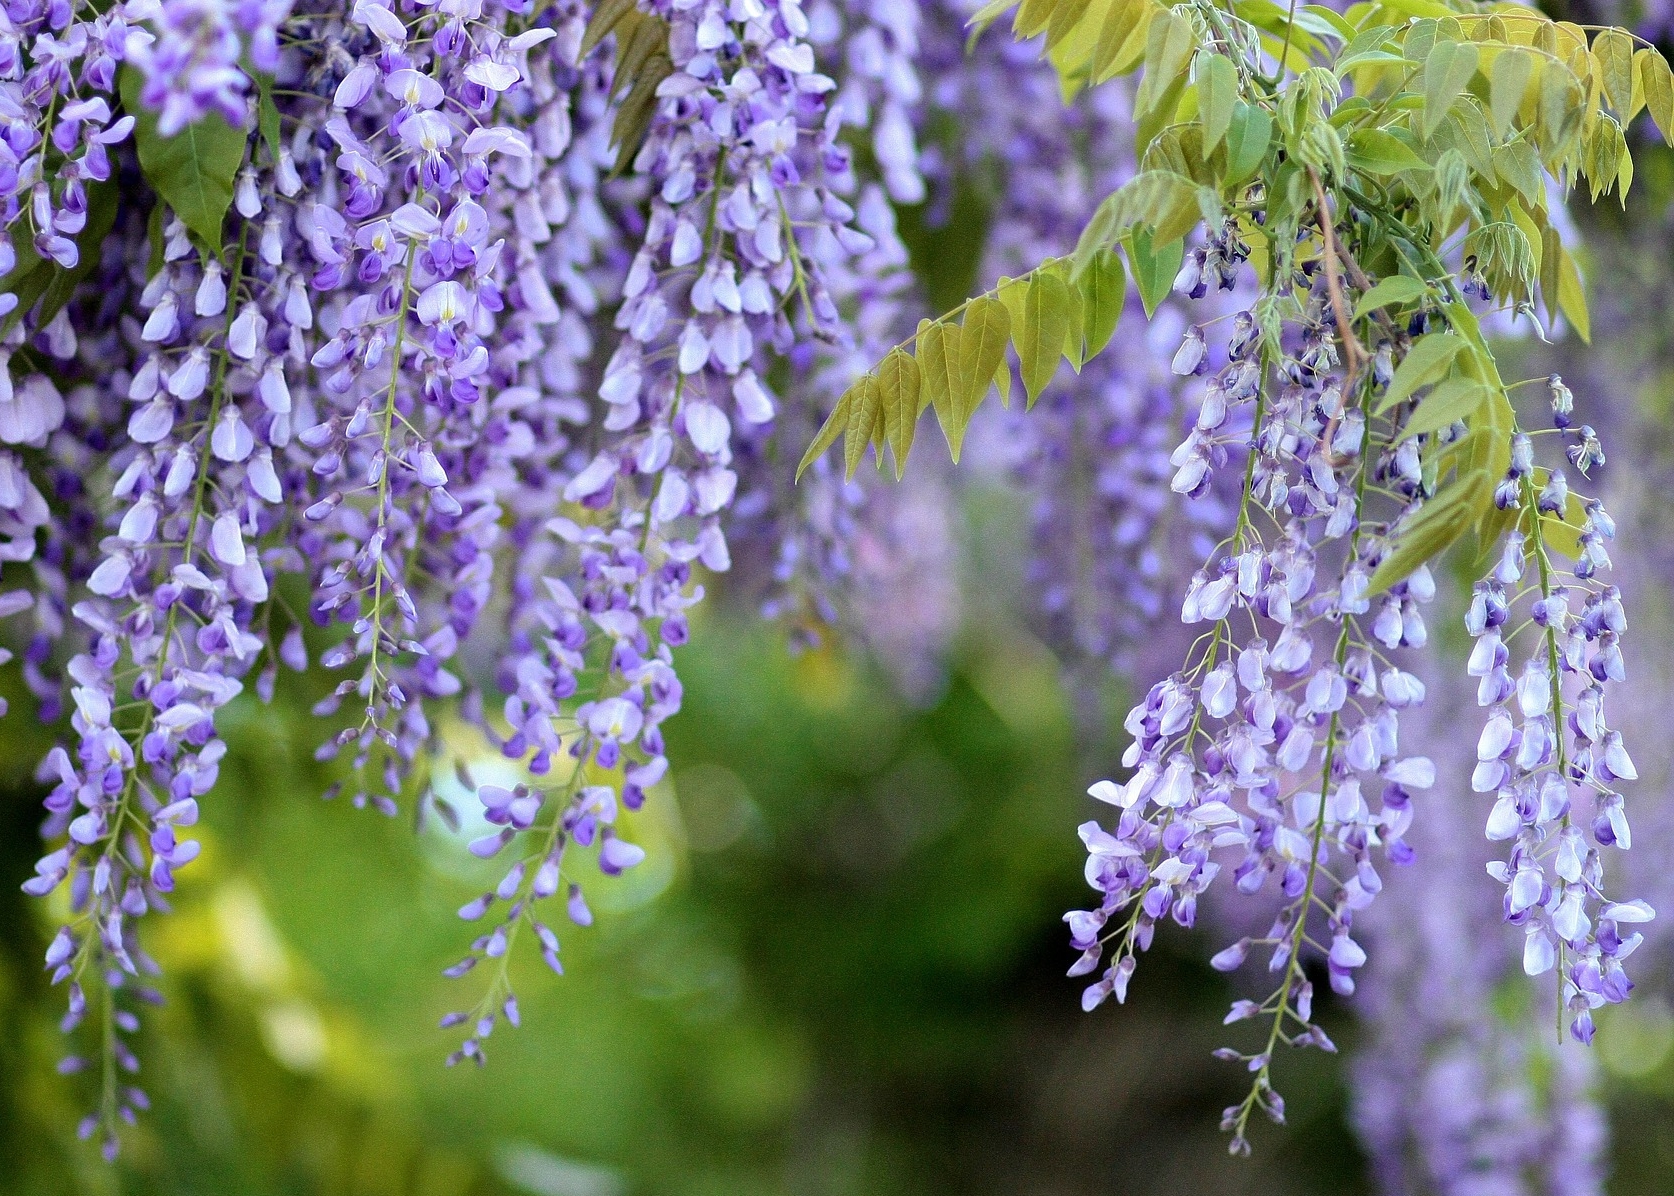 Wisteria: How to Plant, Grow, and Care for Wisteria Vines | The Old ...